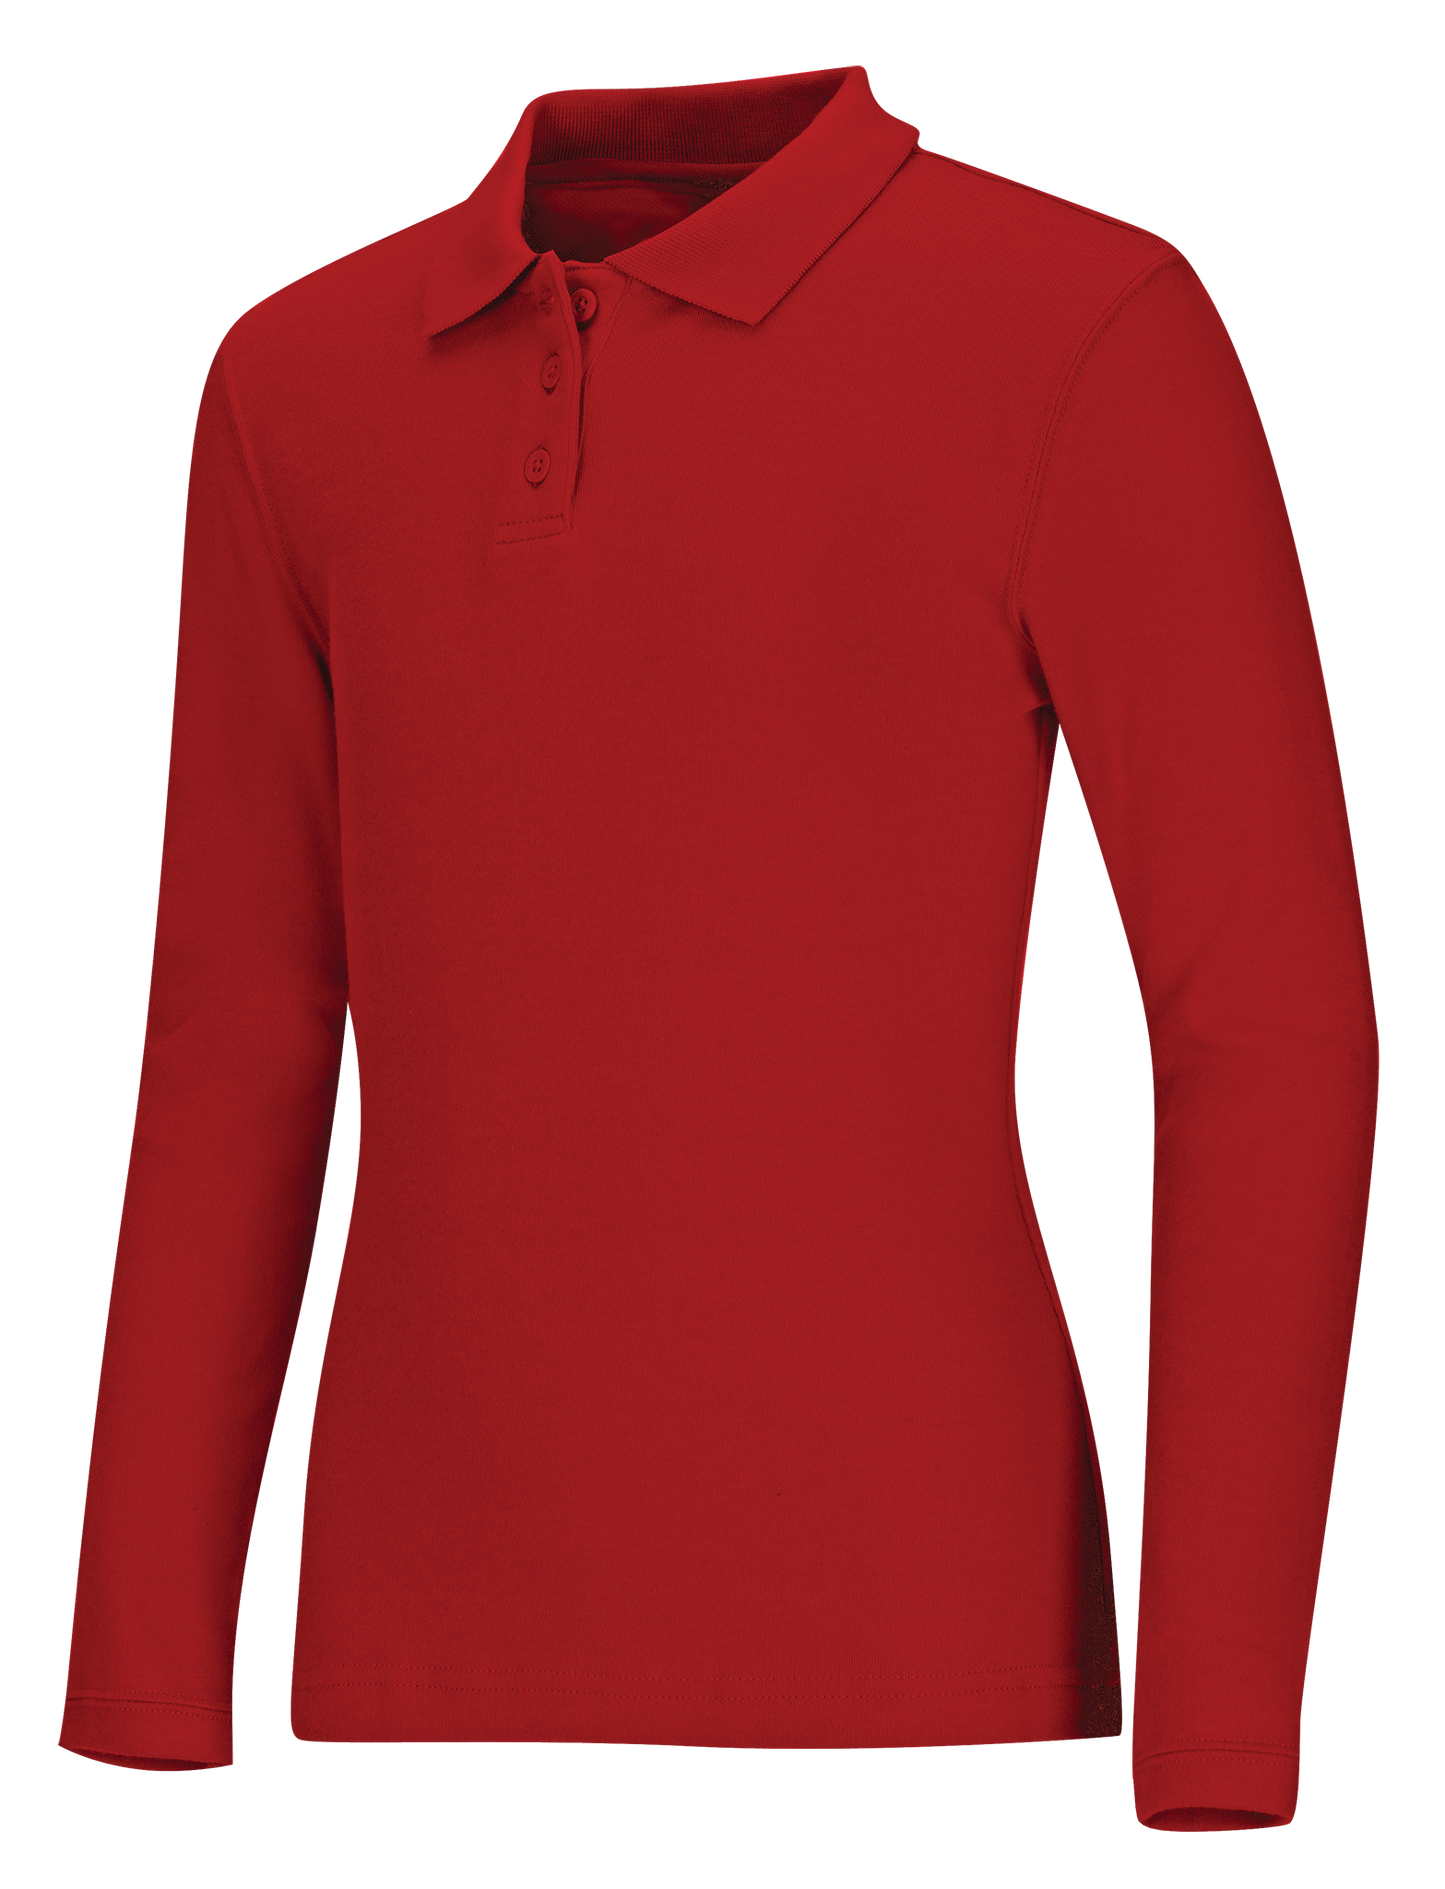 Old Fit Junior Long Sleeve Fitted Interlock Polo